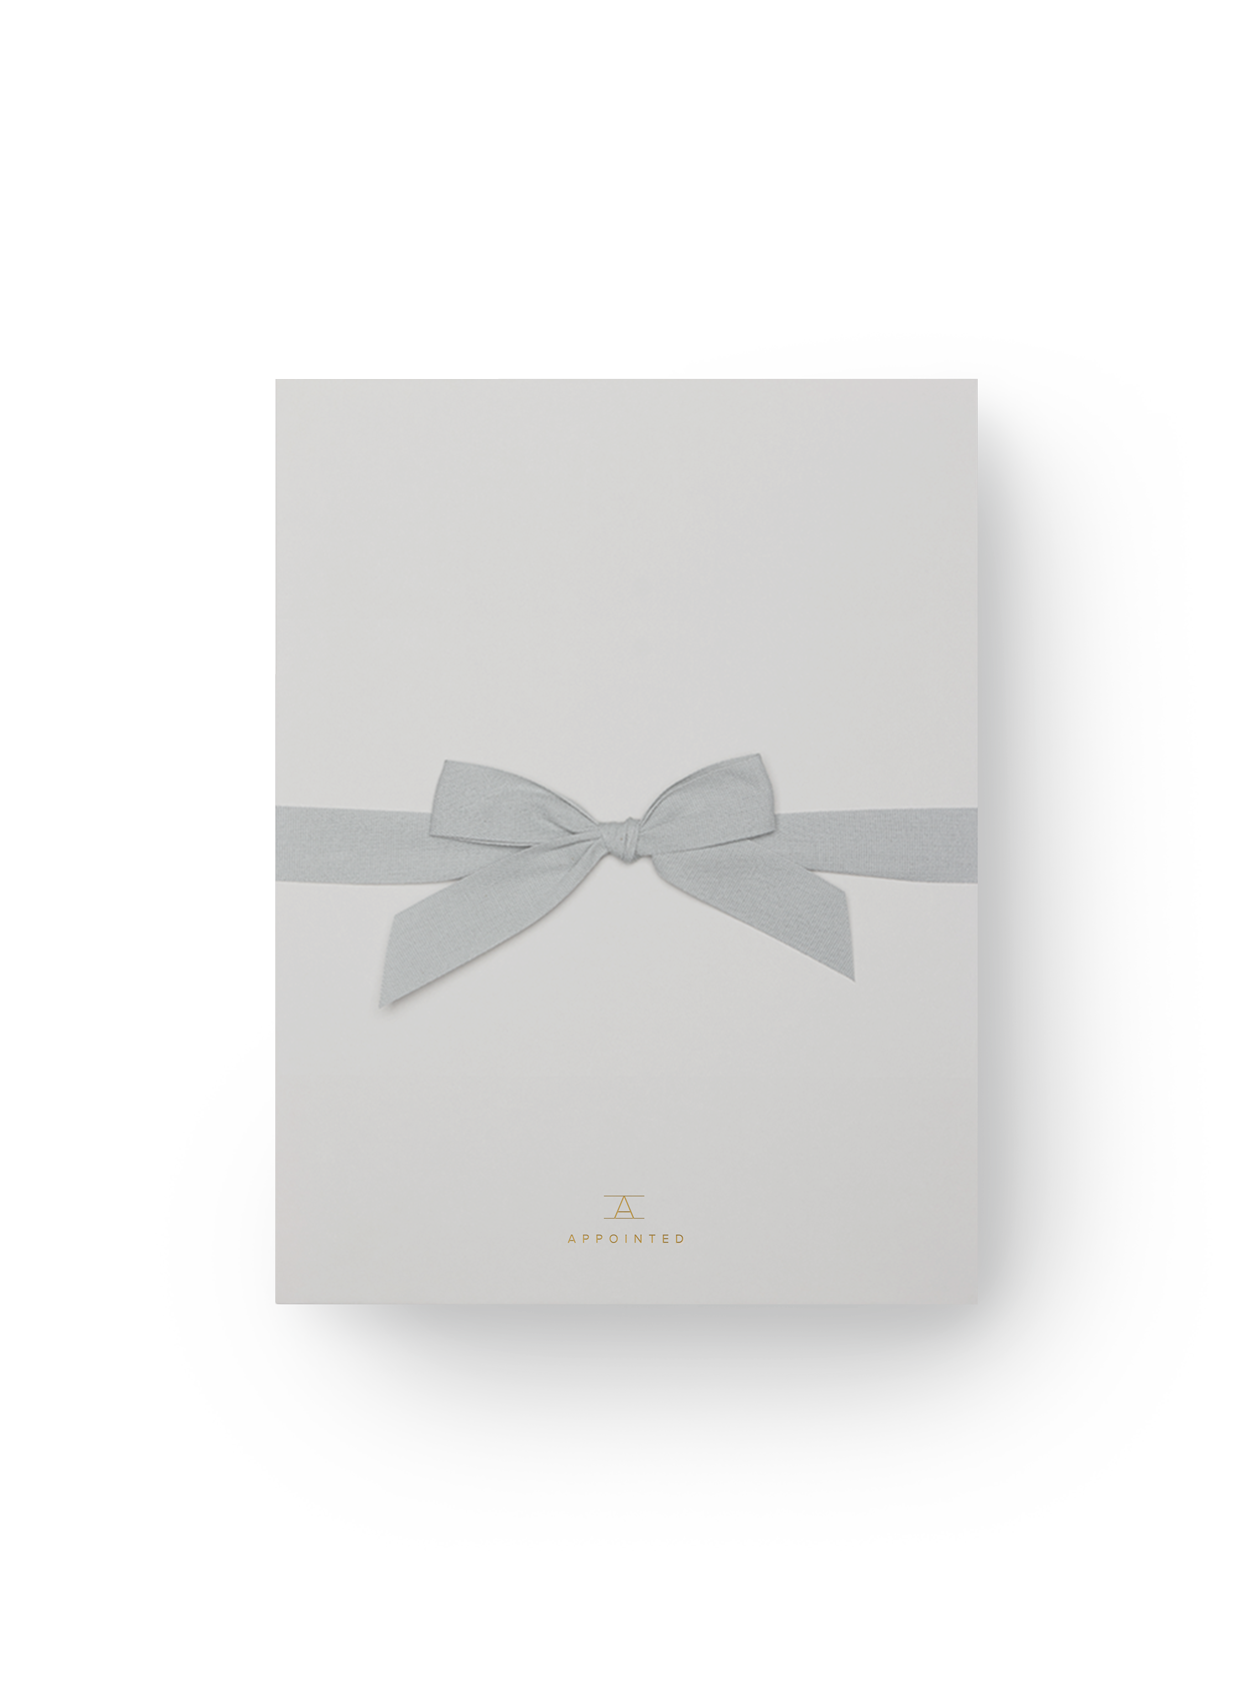 Appointed standard gift box with gray ribbon || Cool Gray